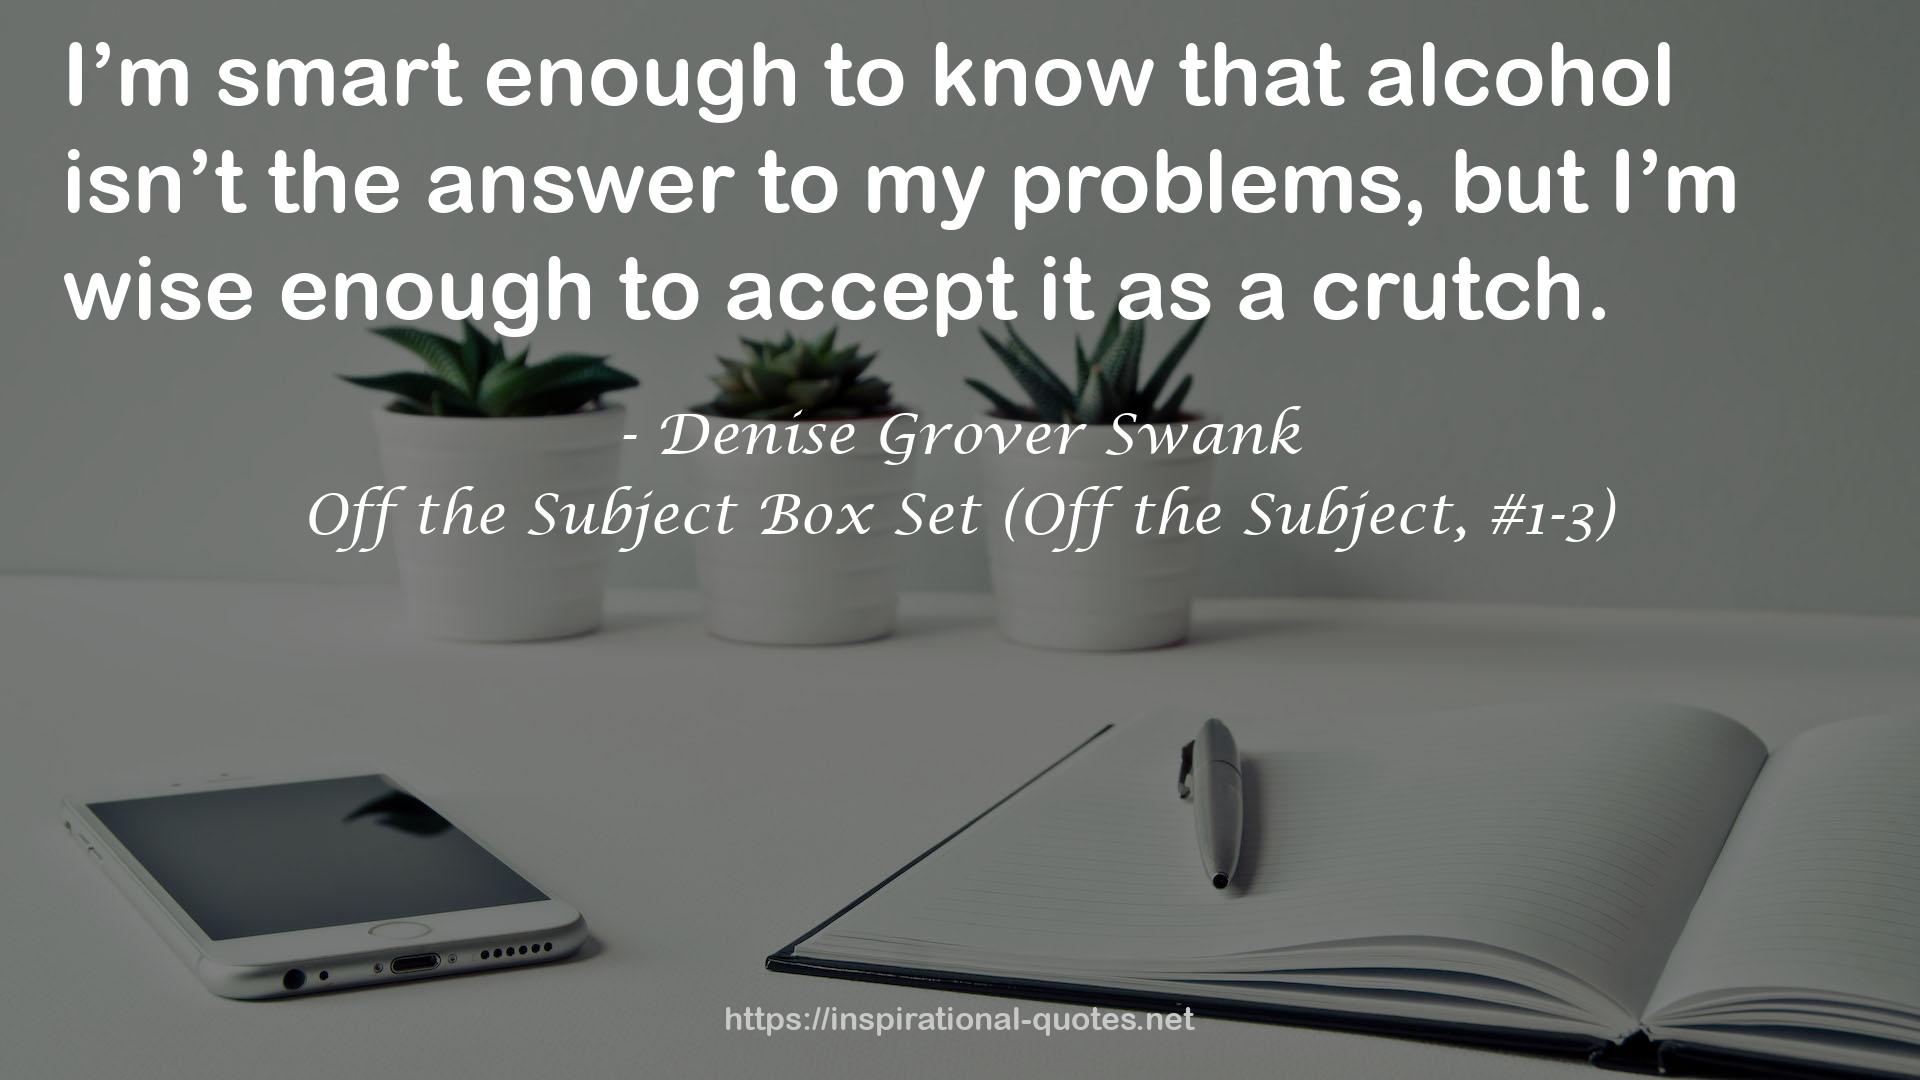 Off the Subject Box Set (Off the Subject, #1-3) QUOTES